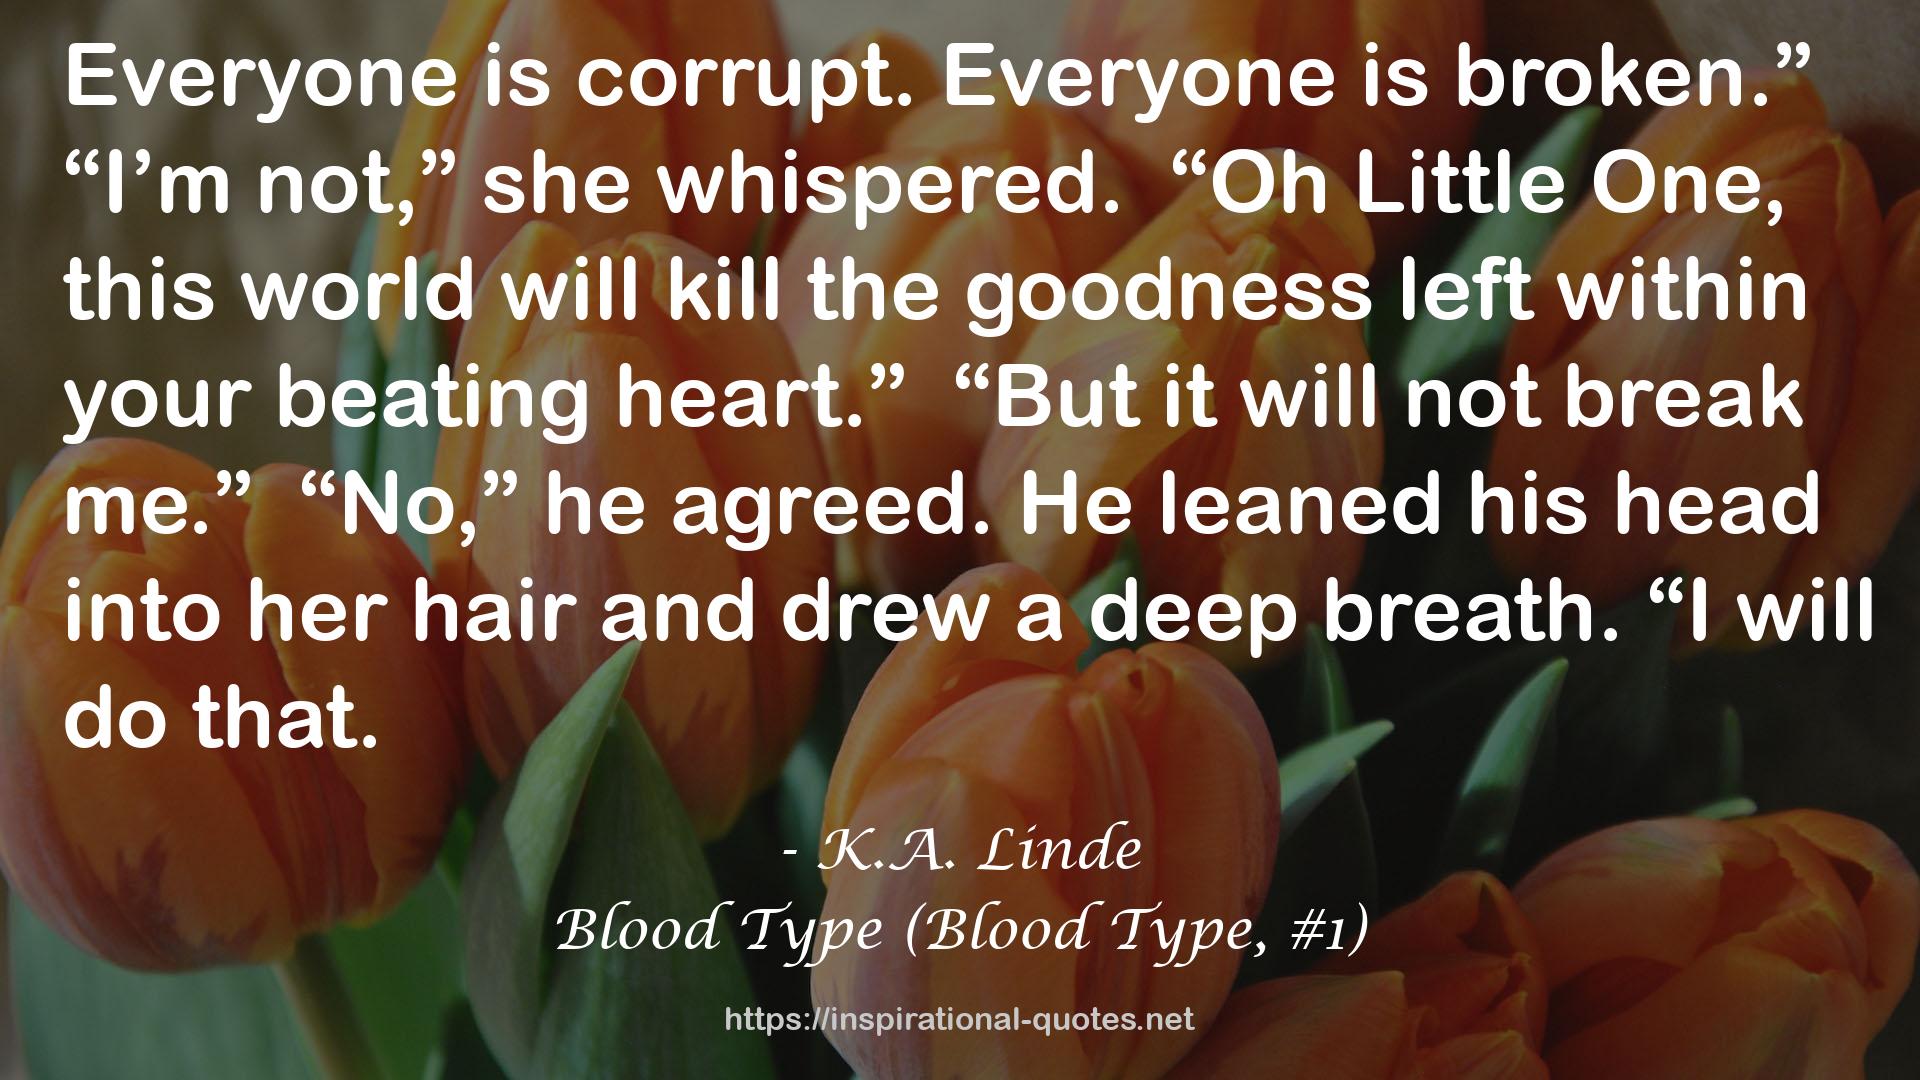 Blood Type (Blood Type, #1) QUOTES